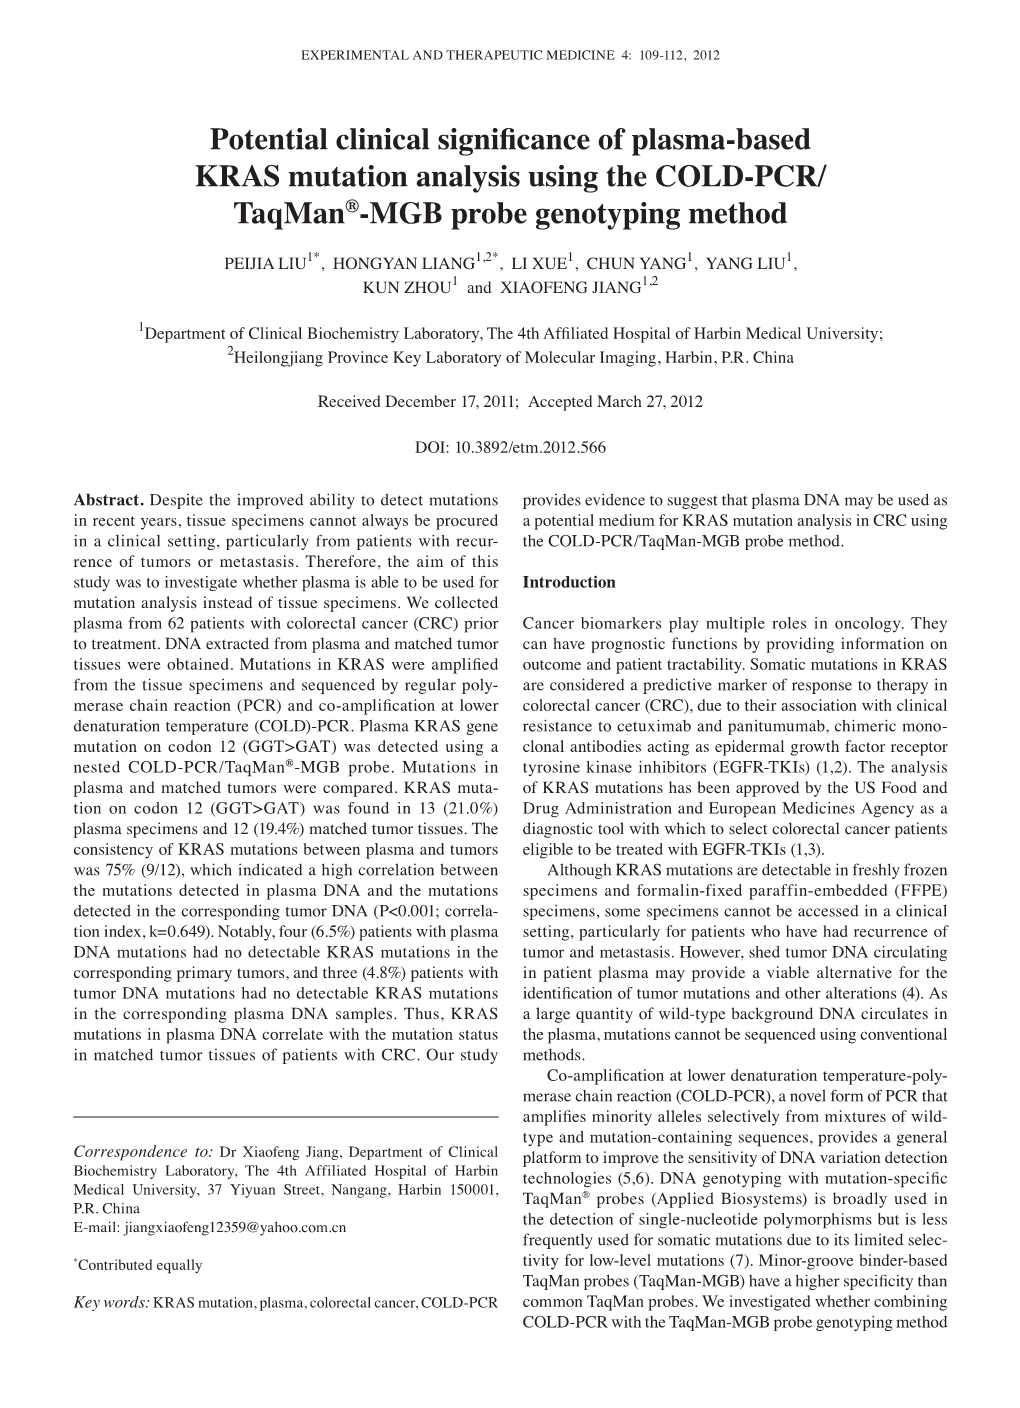 Potential Clinical Significance of Plasma-Based KRAS Mutation Analysis Using the COLD-PCR/ Taqman®-MGB Probe Genotyping Method